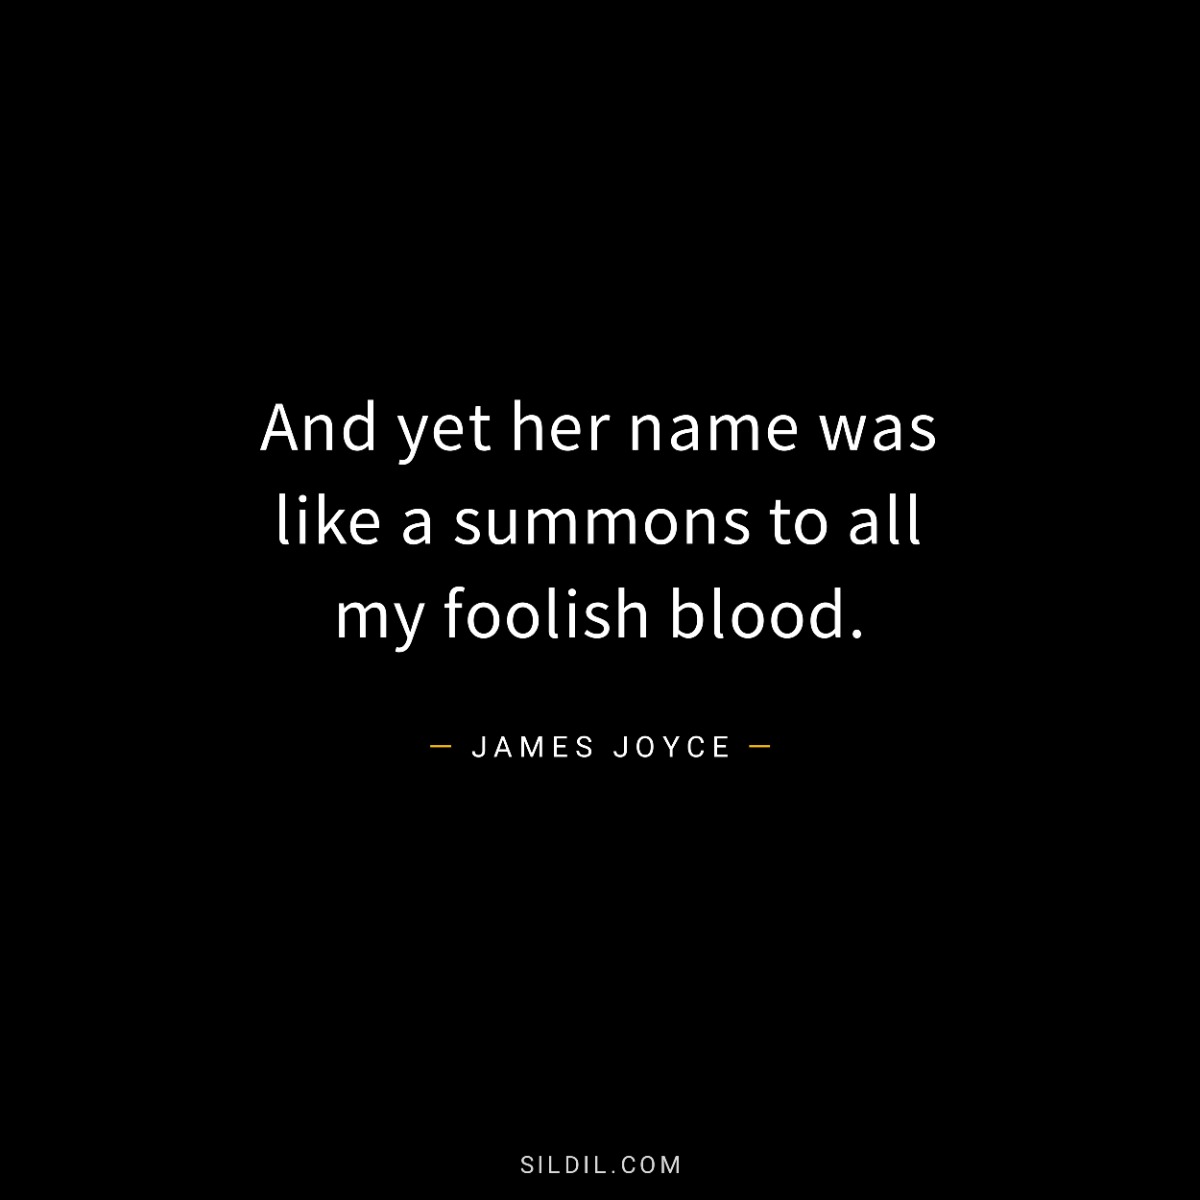 And yet her name was like a summons to all my foolish blood.